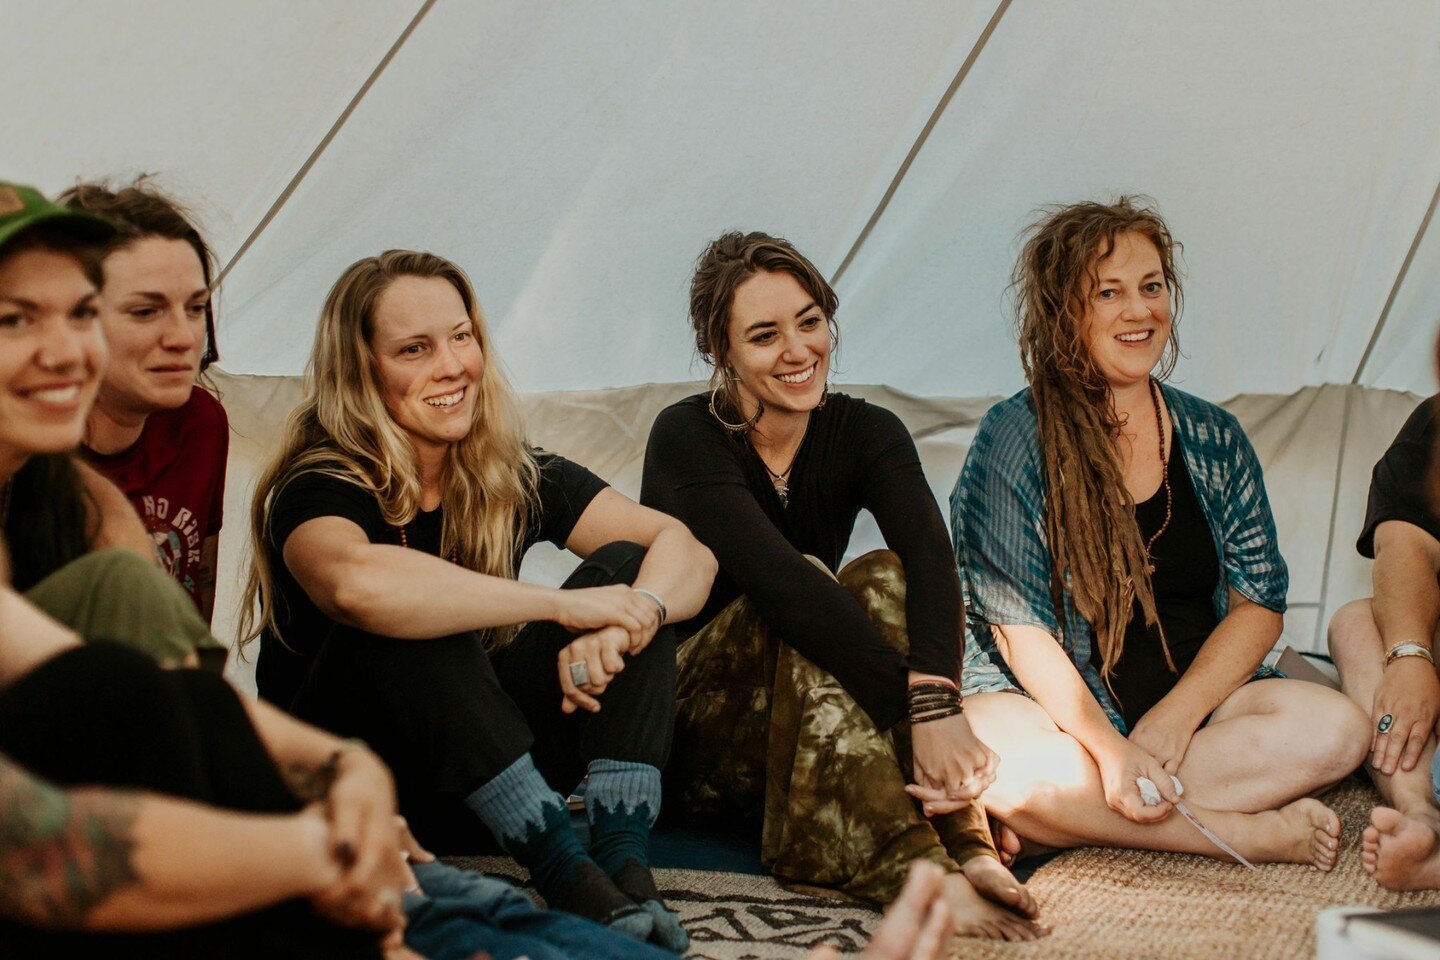 What happens when you bring together 30 women for a weekend of radical self-care and sisterhood?

Deep connections, transformation, and healing. 

InnerShine is an intimate gathering where each woman is given space to be seen, heard, and held. Togeth